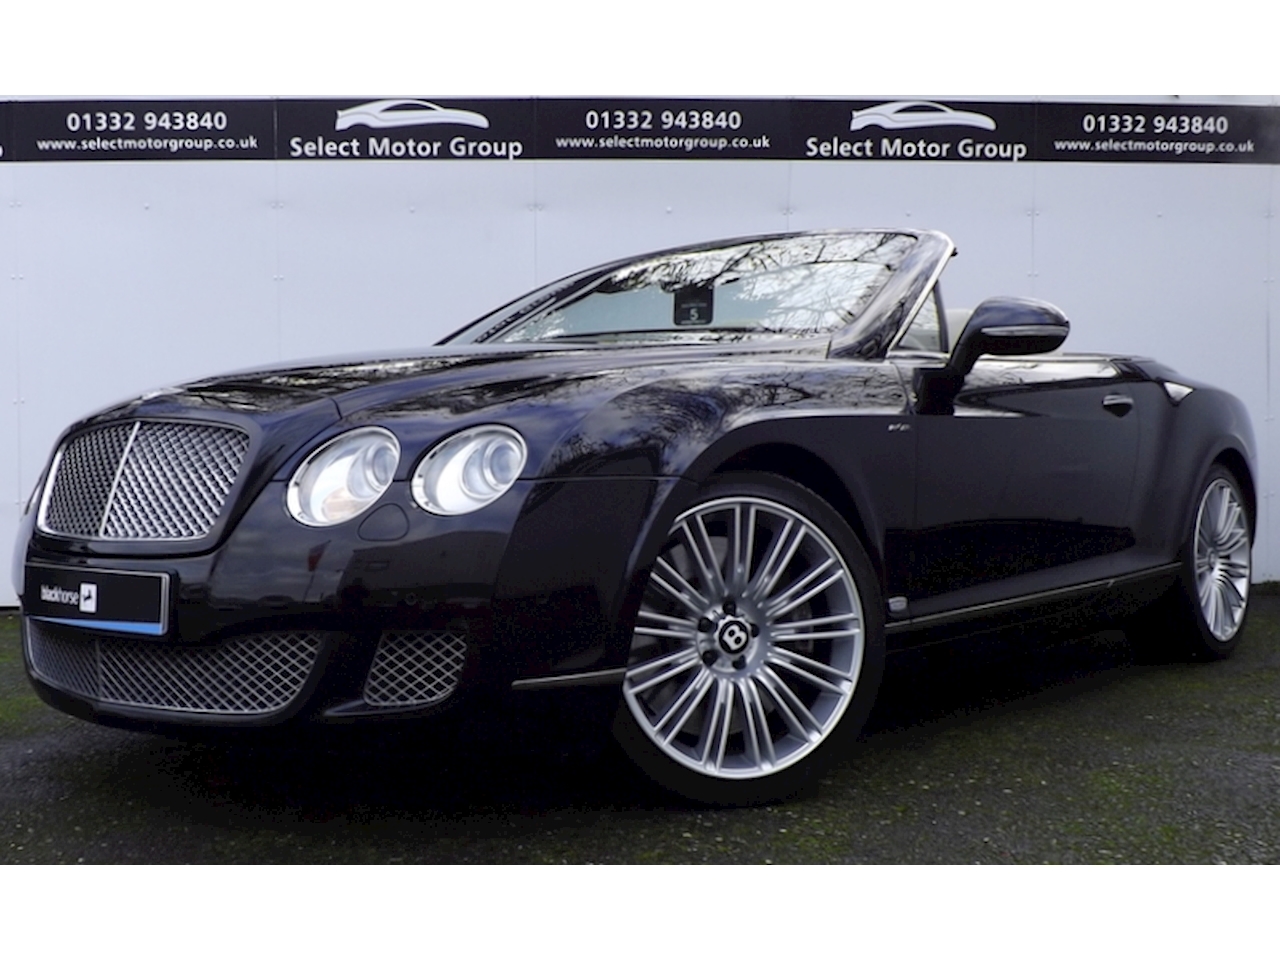 Continental 6.0 W12 GTC Speed Convertible Automatic Petrol